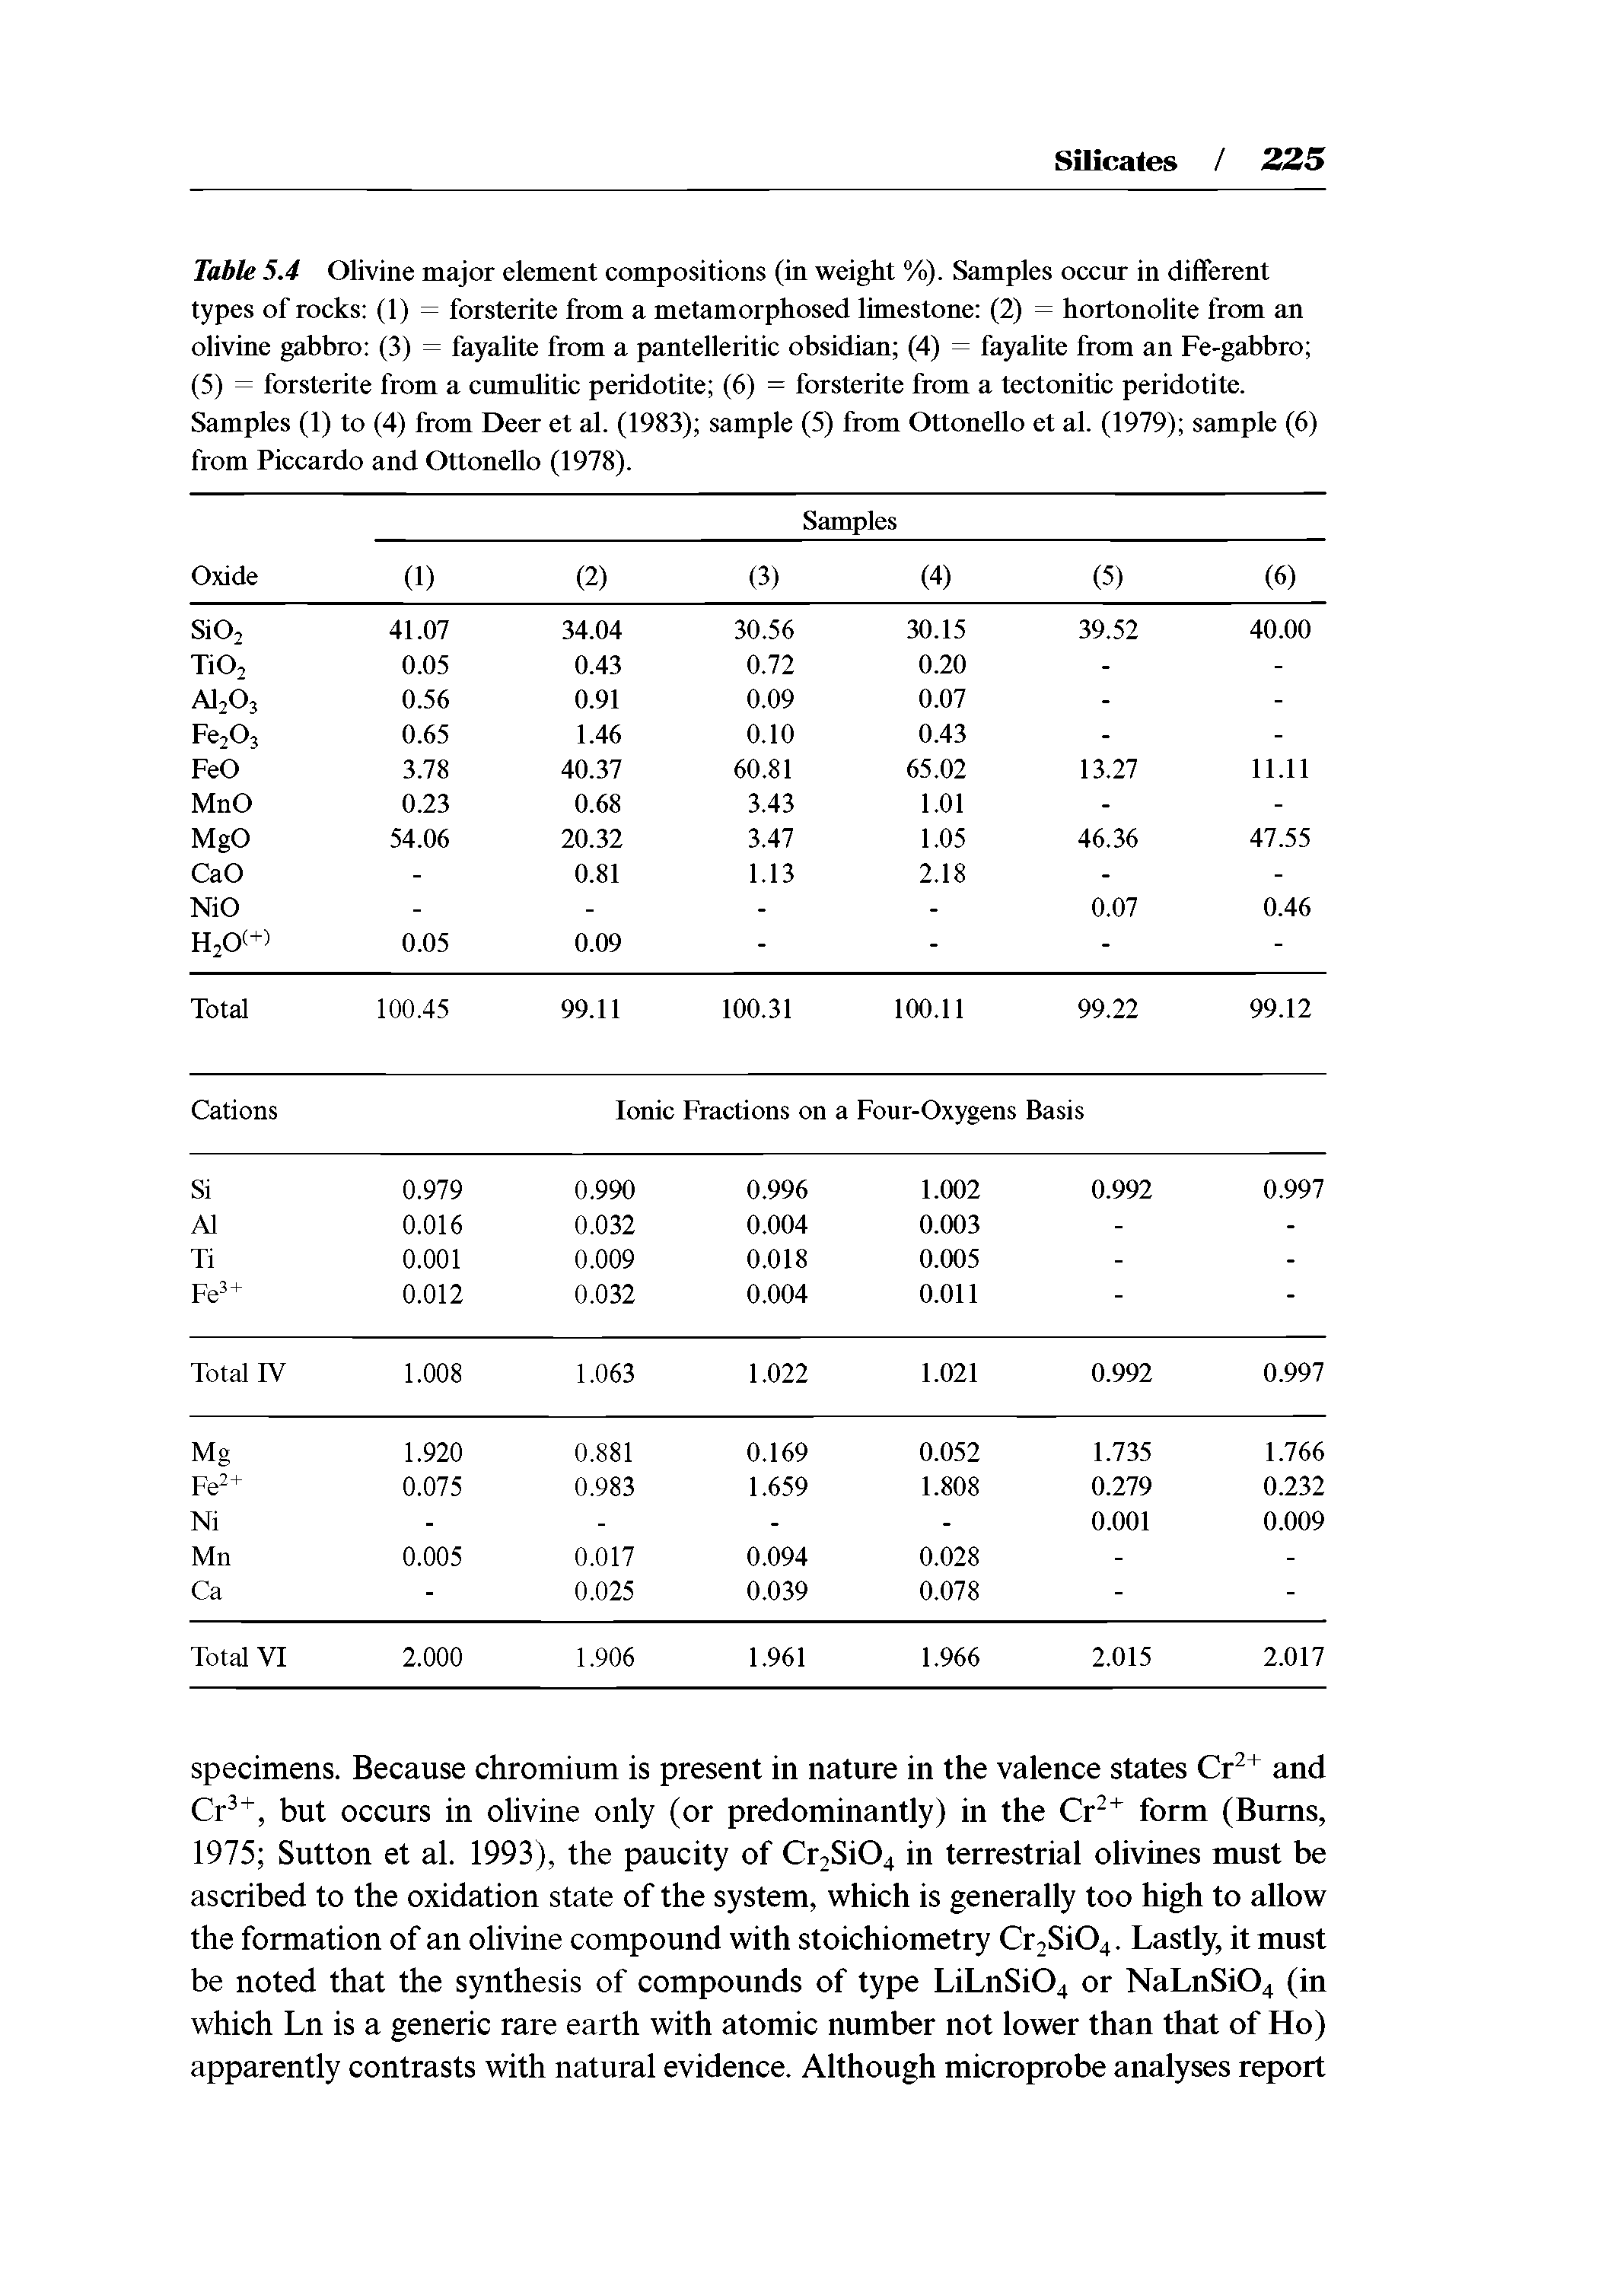 Table 5.4 Olivine major element compositions (in weight %). Samples occur in different types of rocks (1) = forsterite from a metamorphosed limestone (2) = hortonolite from an olivine gabbro (3) = fayalite from a pantelleritic obsidian (4) = fayalite from an Fe-gabbro (5) = forsterite from a cumulitic peridotite (6) = forsterite from a tectonitic peridotite. Samples (1) to (4) from Deer et al. (1983) sample (5) from Ottonello et al. (1979) sample (6) from Piccardo and Ottonello (1978). ...